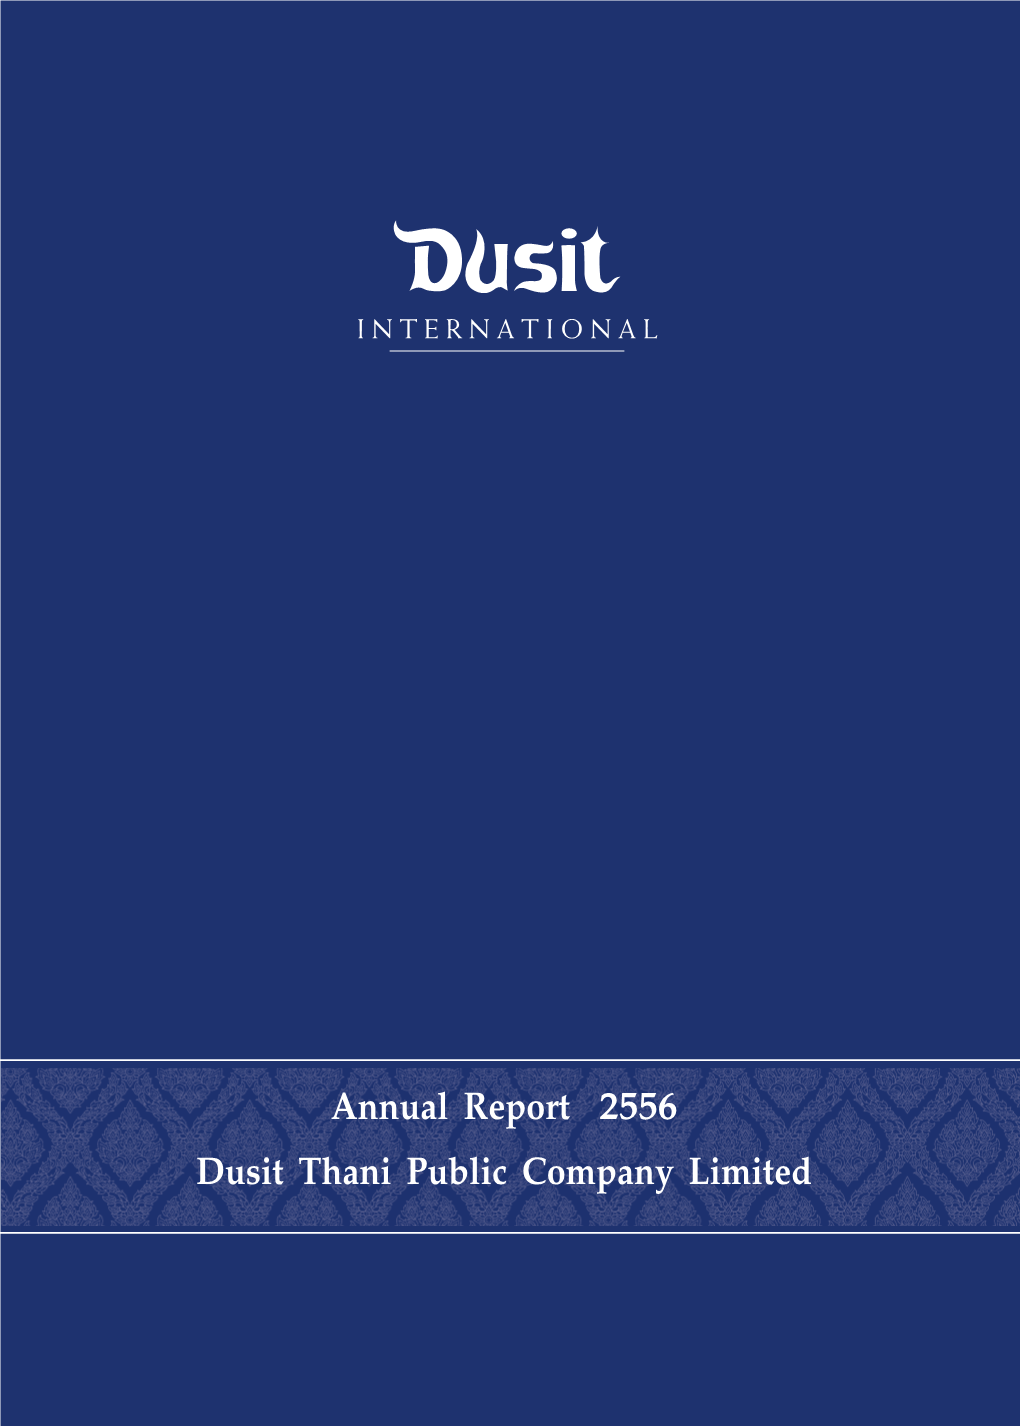 DTC: Dusit Thani Public Company Limited | Annual Report 2013